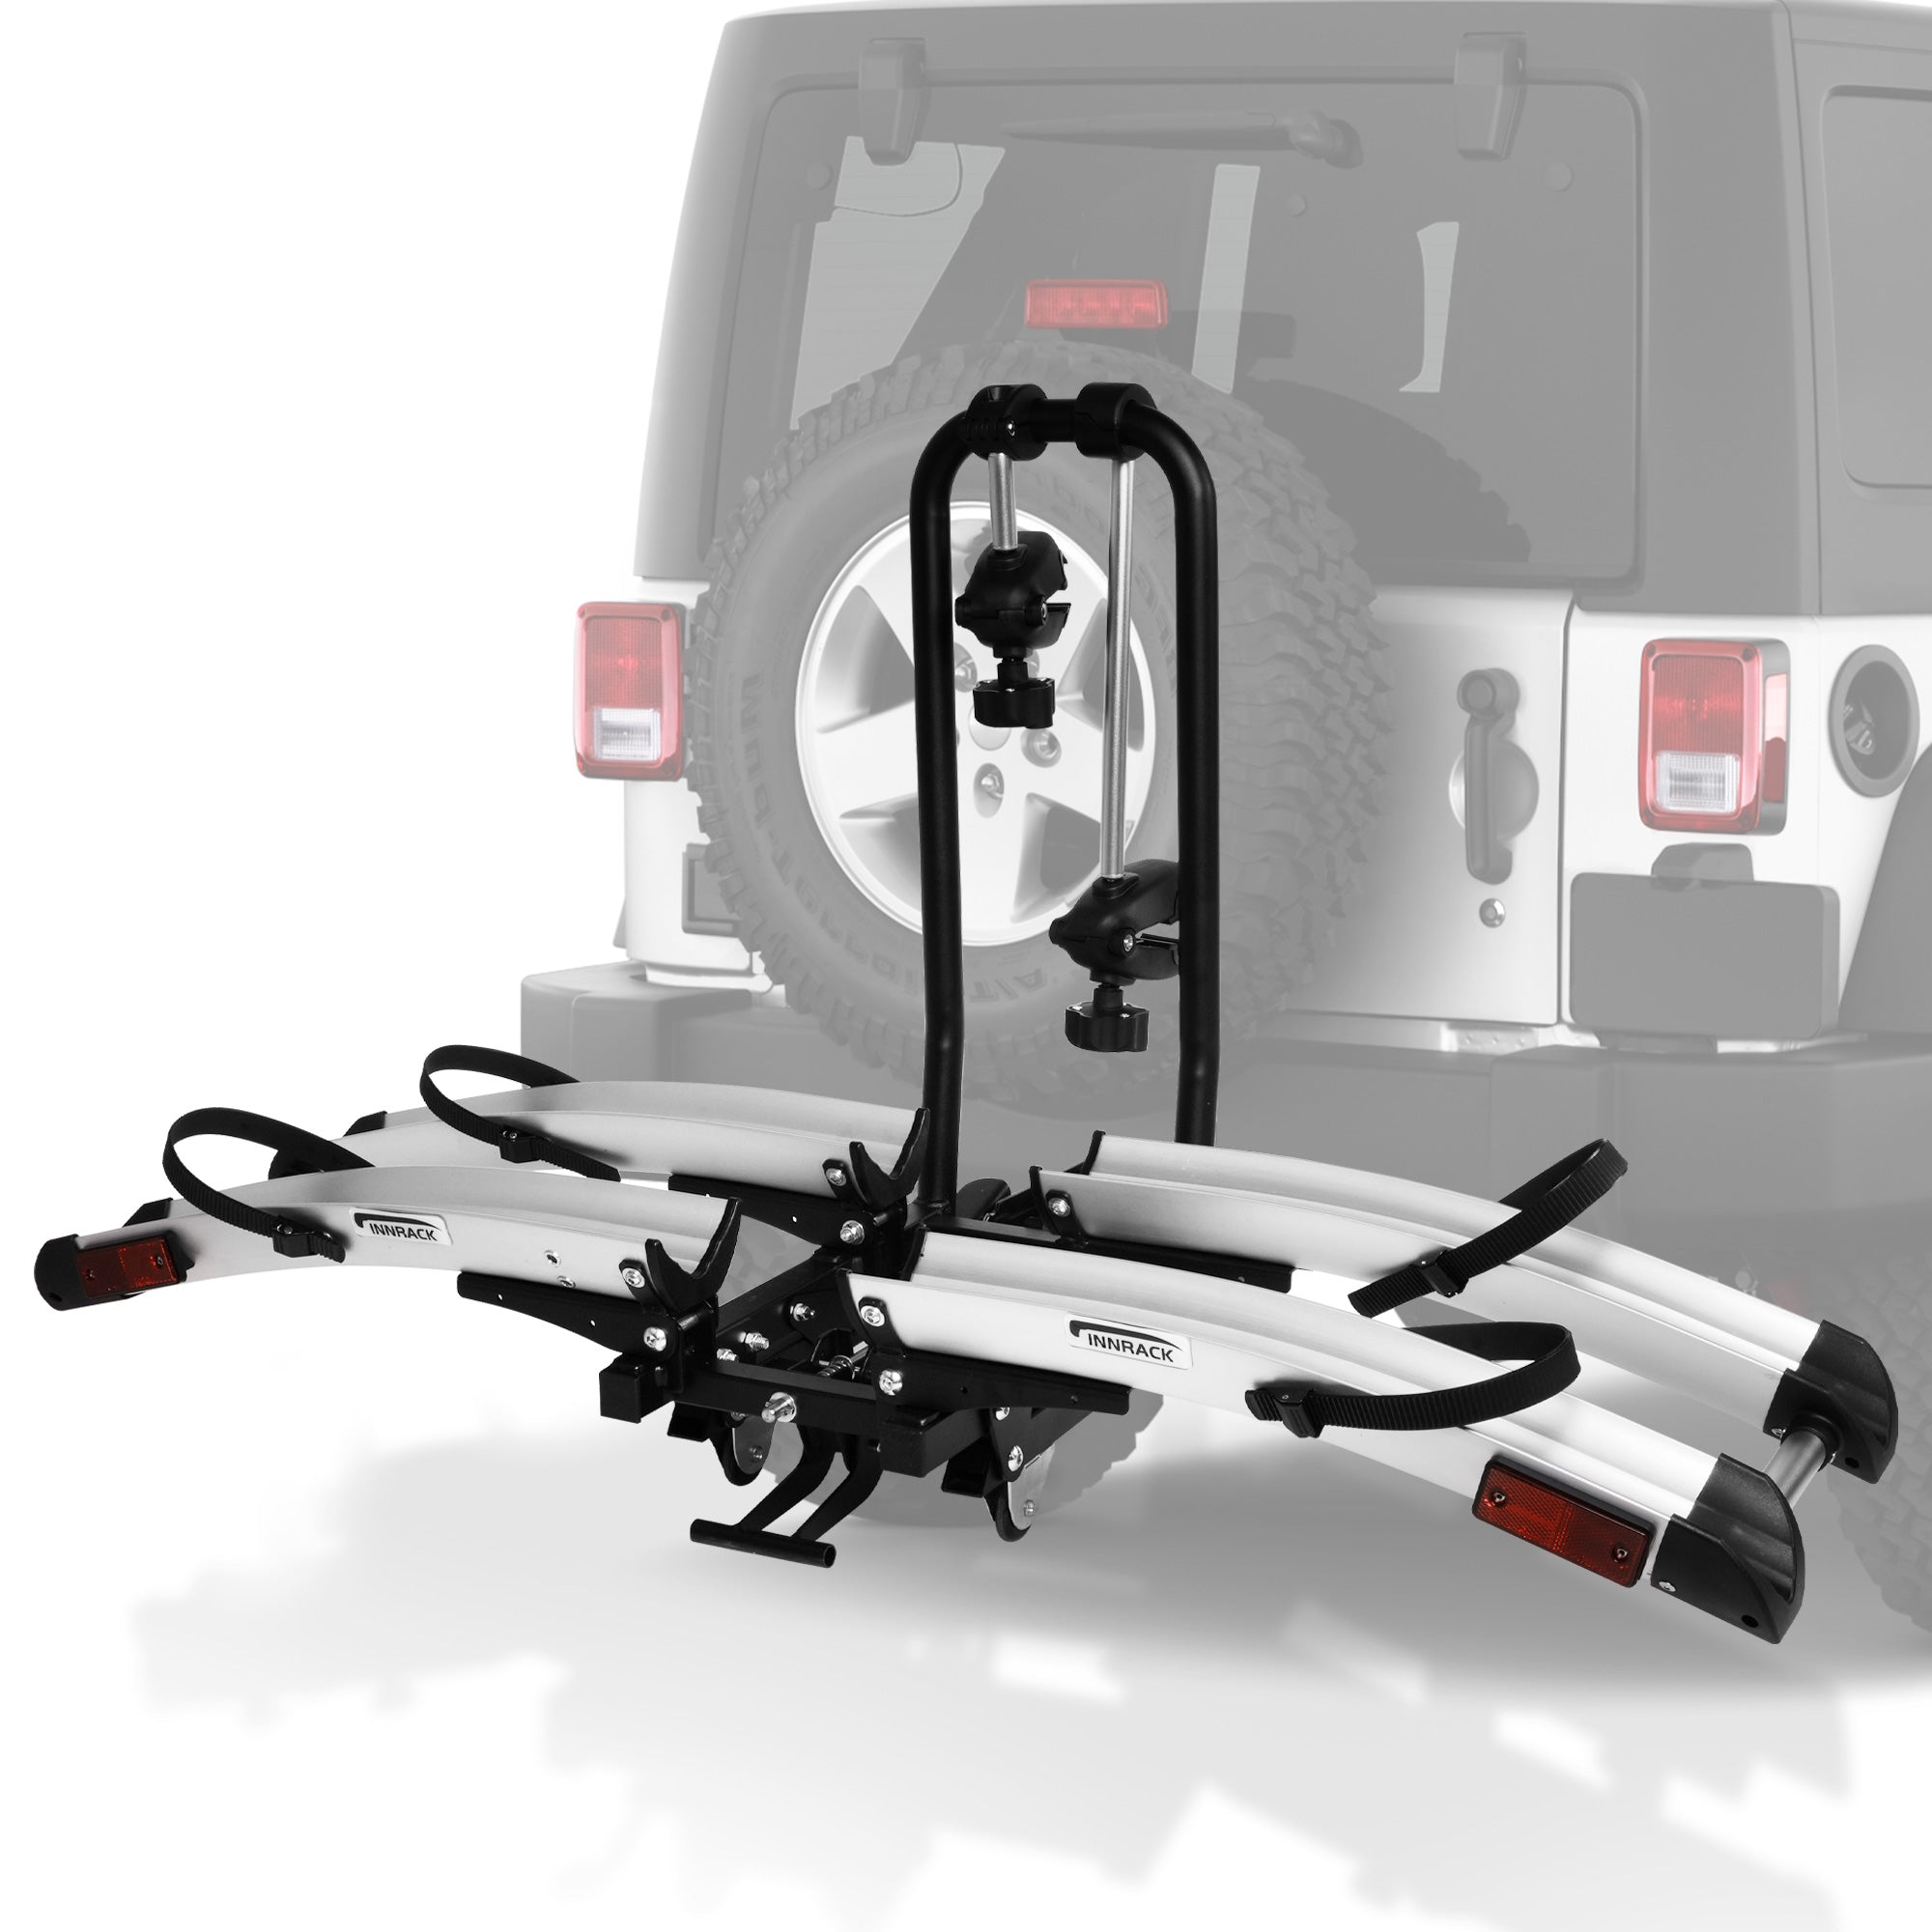 Foldable Hitch Bike Rack for 2 Bikes - 132 lbs Capacity, 360° Adjustable Arms, Smart Tilting, Fits 3.9'' Width Tires, SUV & Truck, 2" Receiver